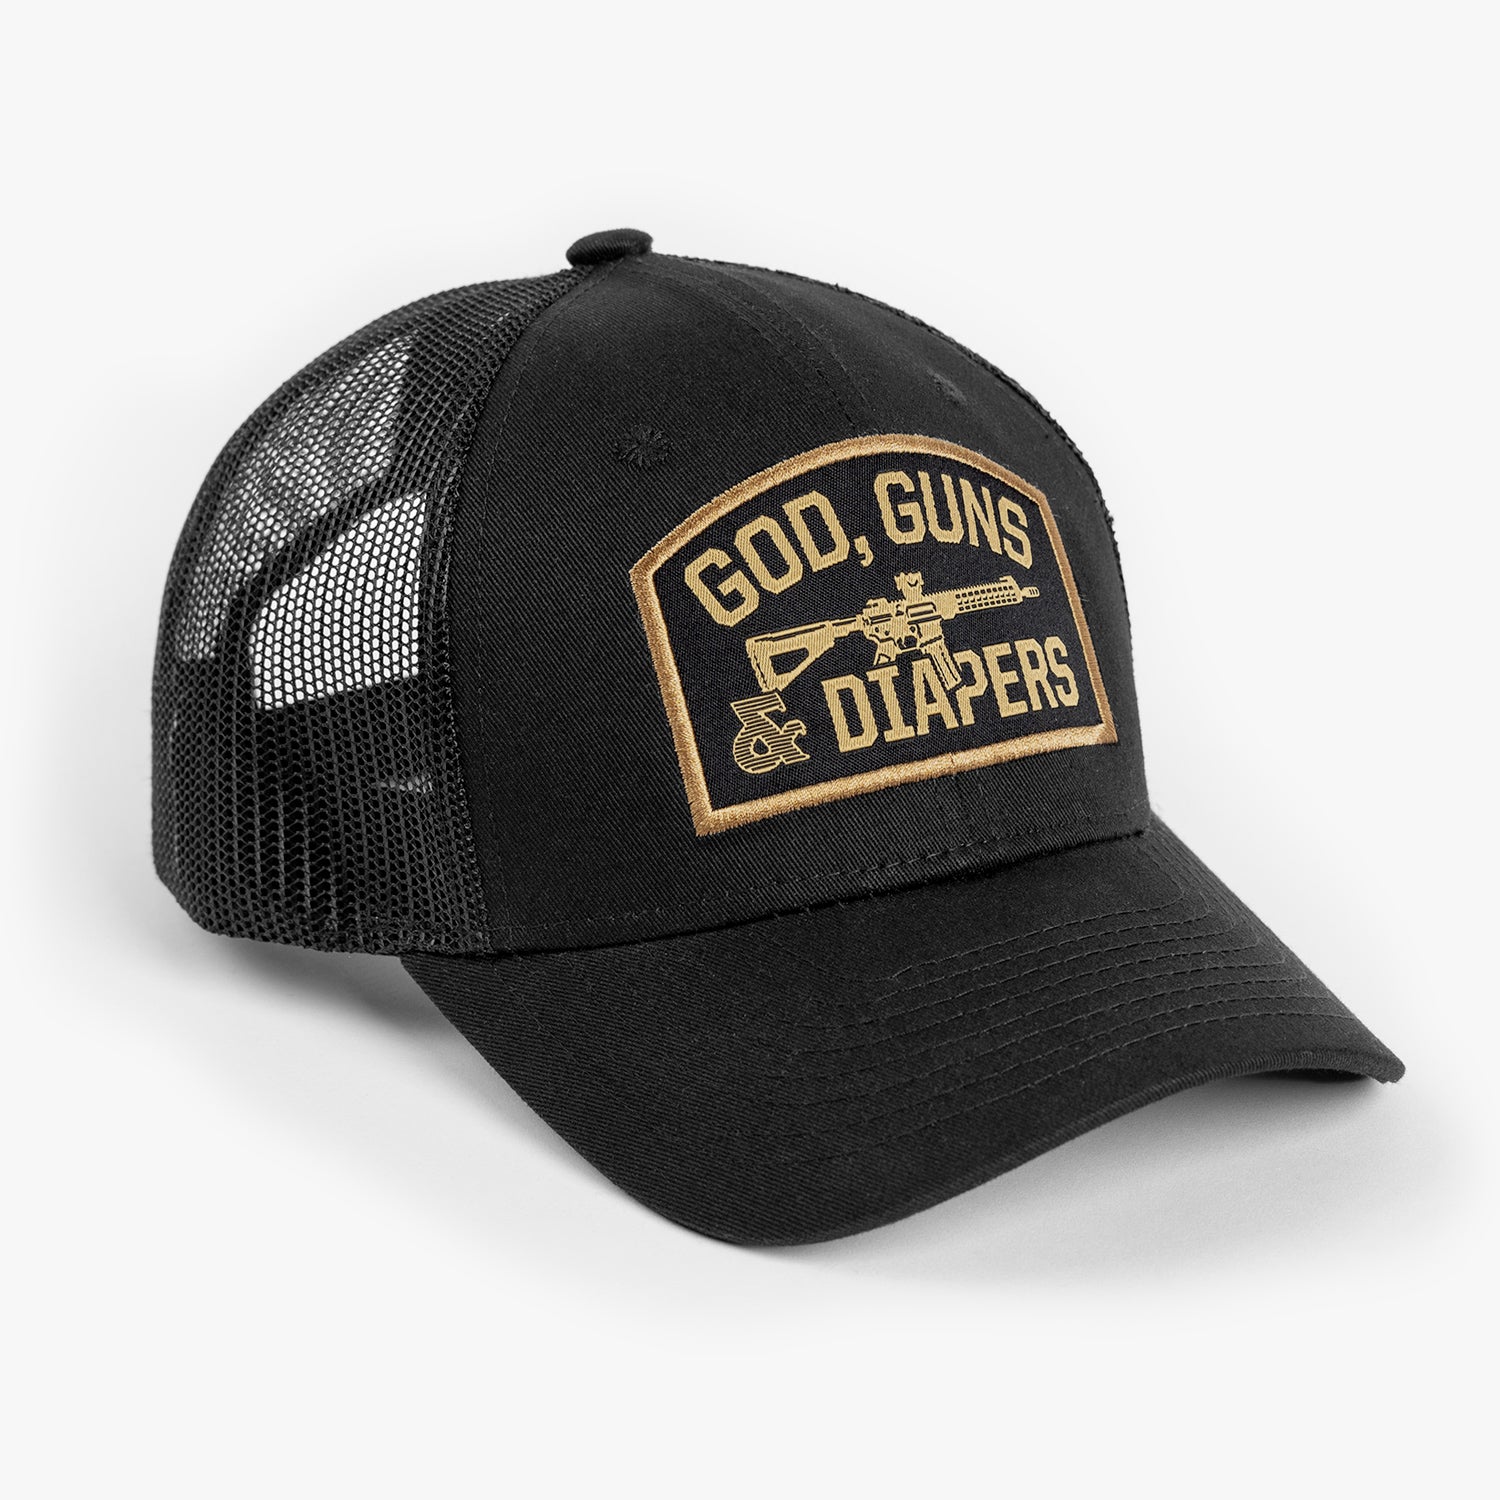 Hat showing rear black mesh and solid black front with gold embroidery reading God, Guns & Diapers